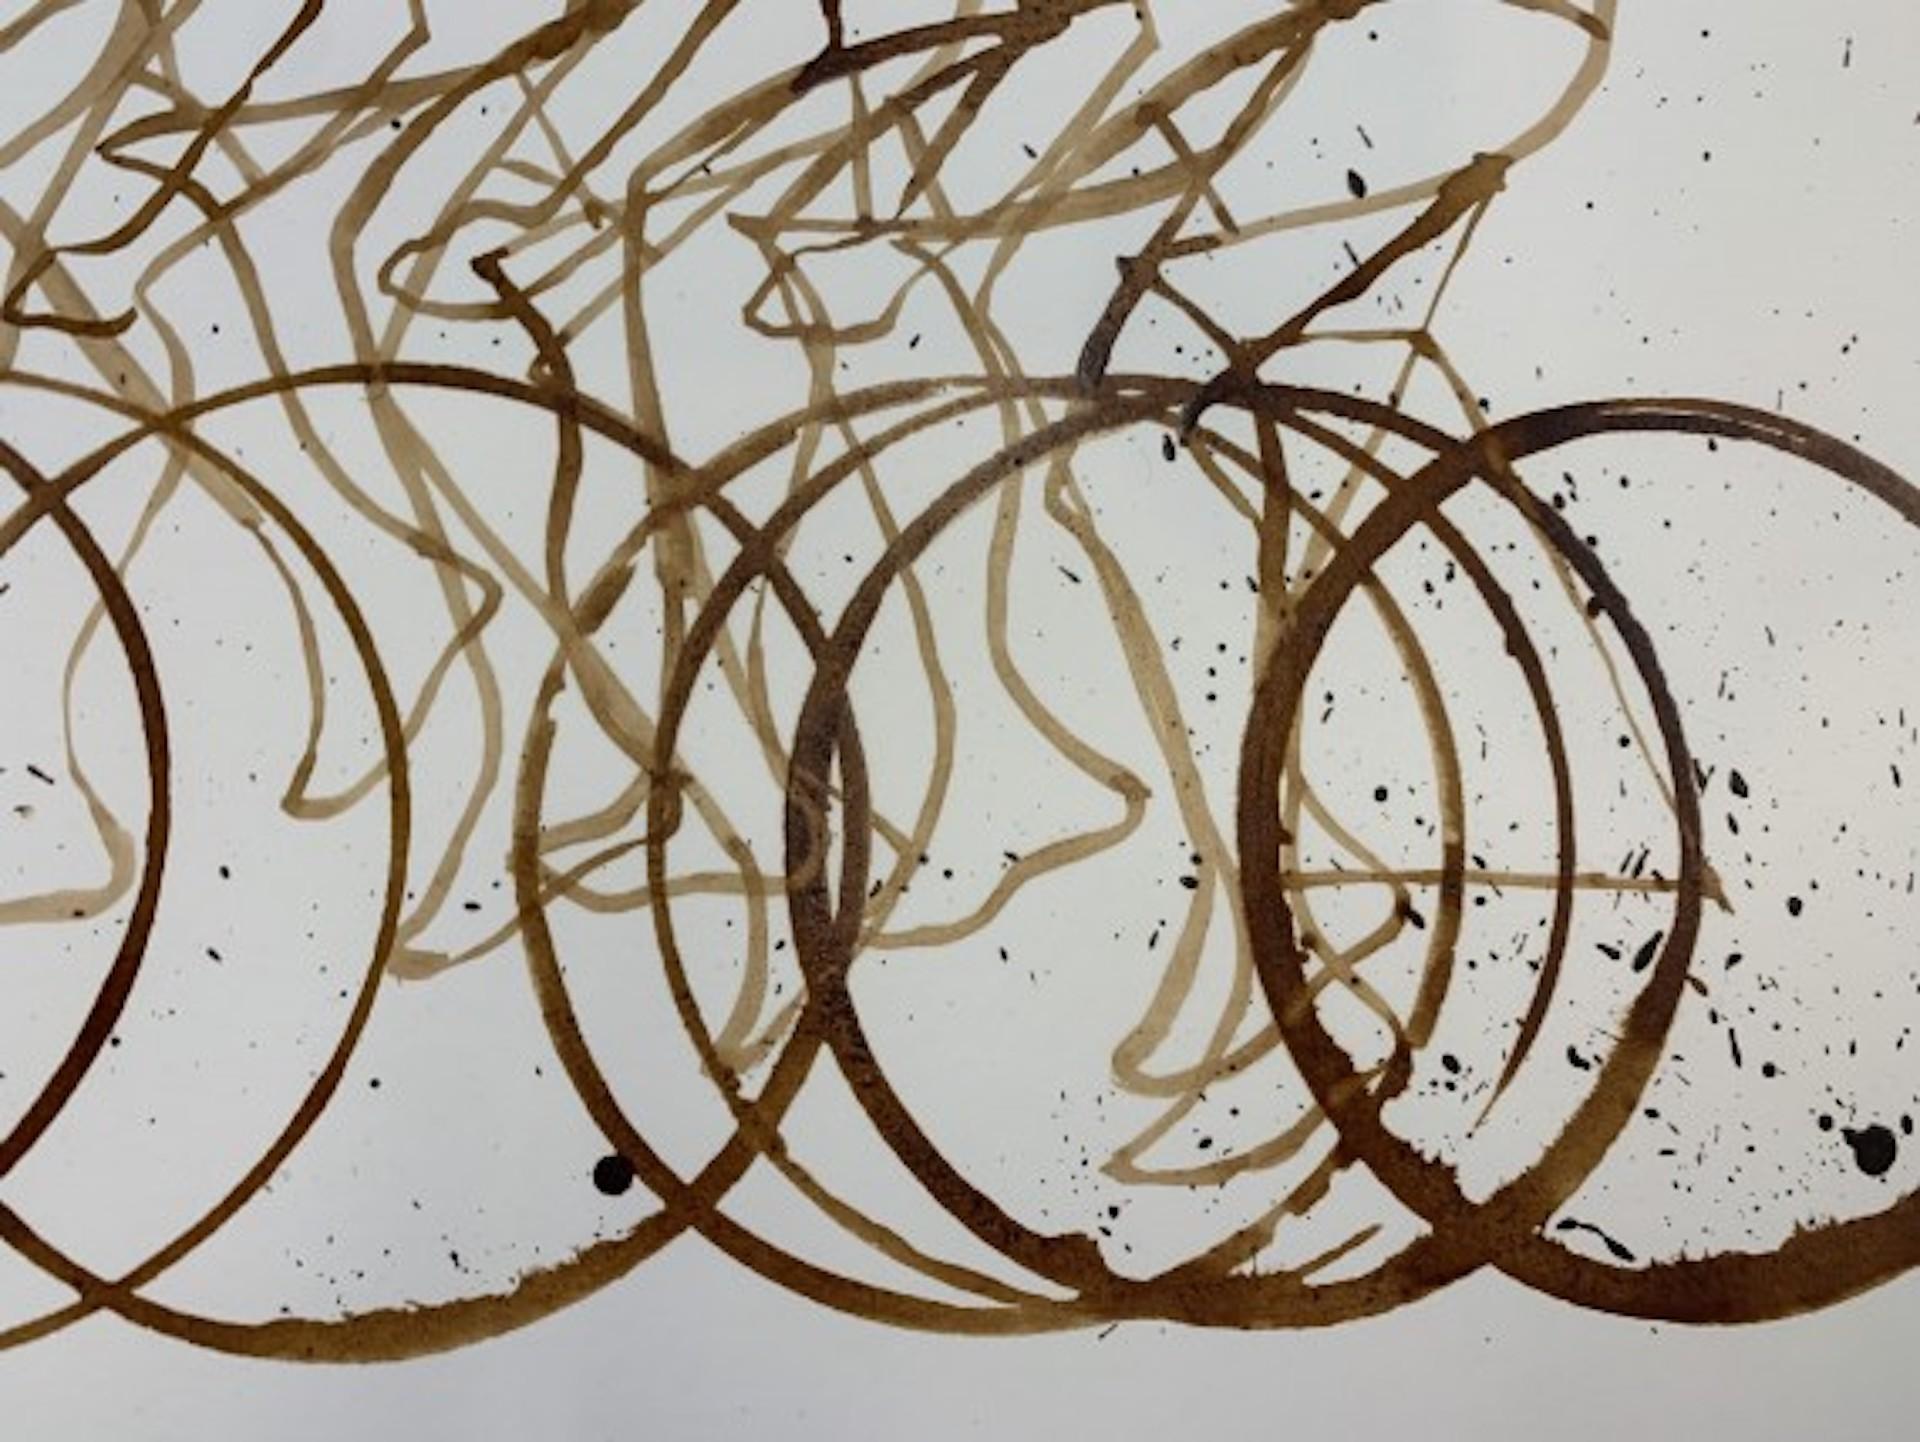 Coffee Peloton Series XIV by Eliza Southwood [2021]
original
Coffee on paper
Image size: H:83.7 cm x W:114 cm
Complete Size of Unframed Work: H:83.7 cm x W:114 cm x D:0.1cm
Sold Unframed
Please note that insitu images are purely an indication of how